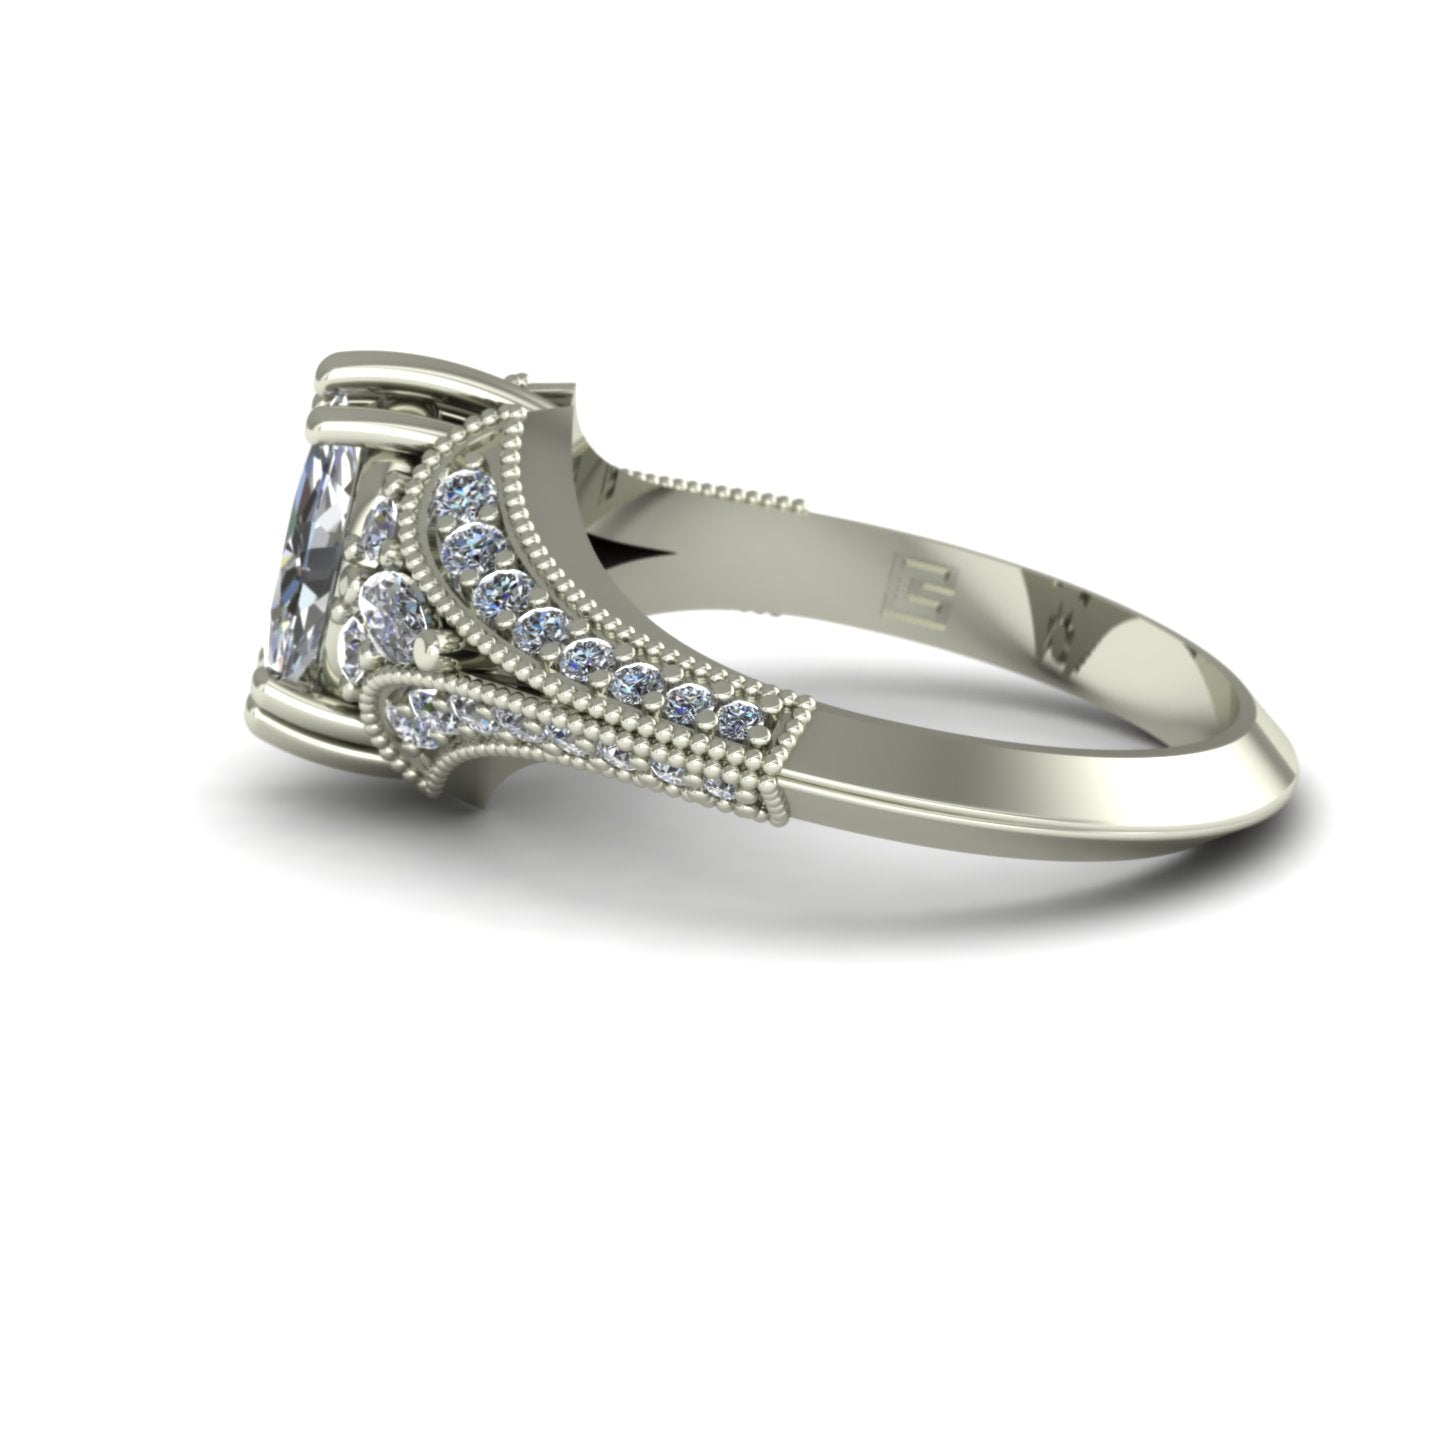 half carat marquise diamond engagement ring in 14k white gold - Charles Babb Designs - side view